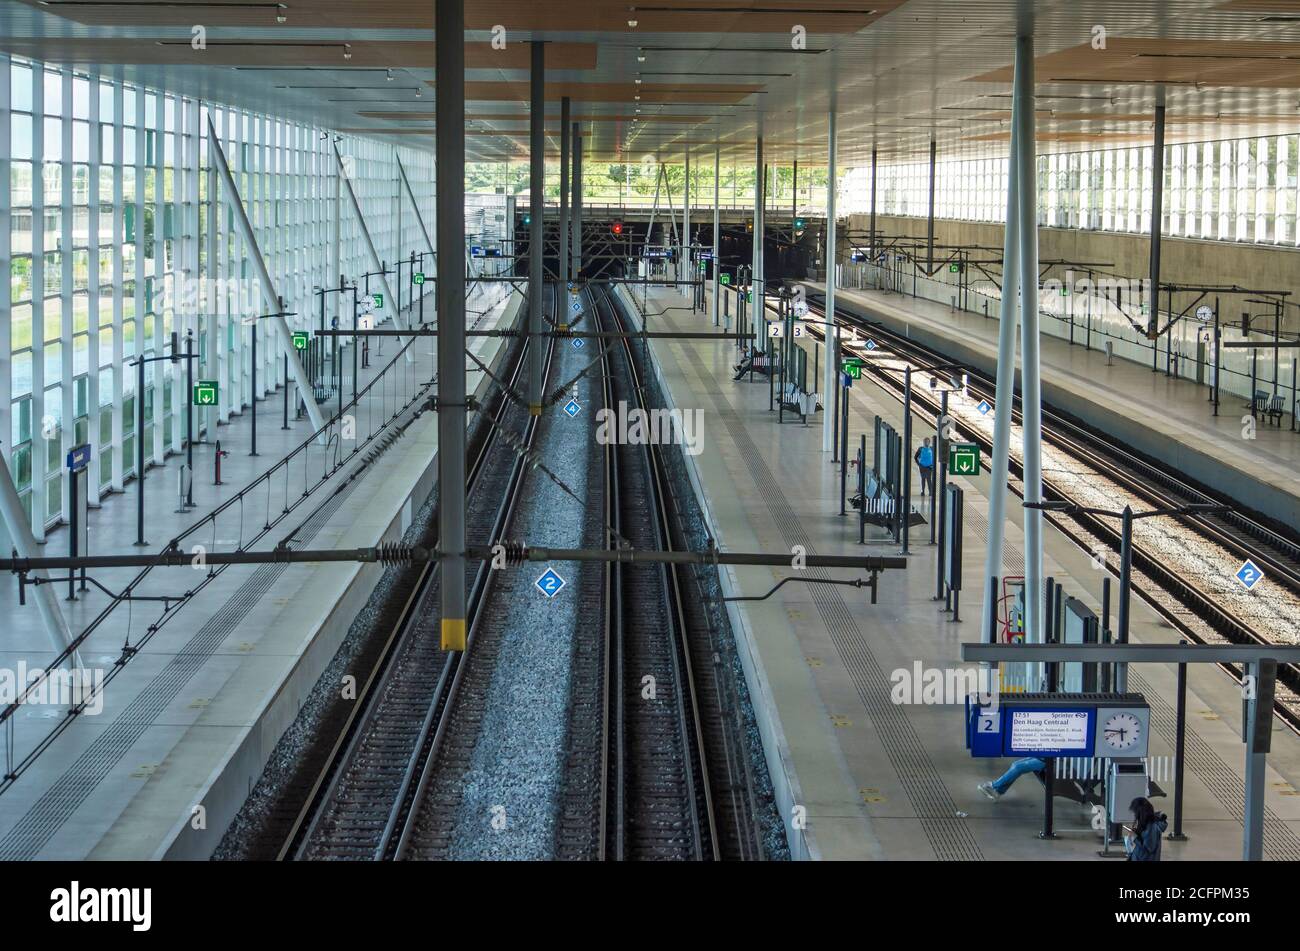 Barendrecht, The Netherlands, July 10, 2020: interior of the railway station with four tracks and glass facades Stock Photo